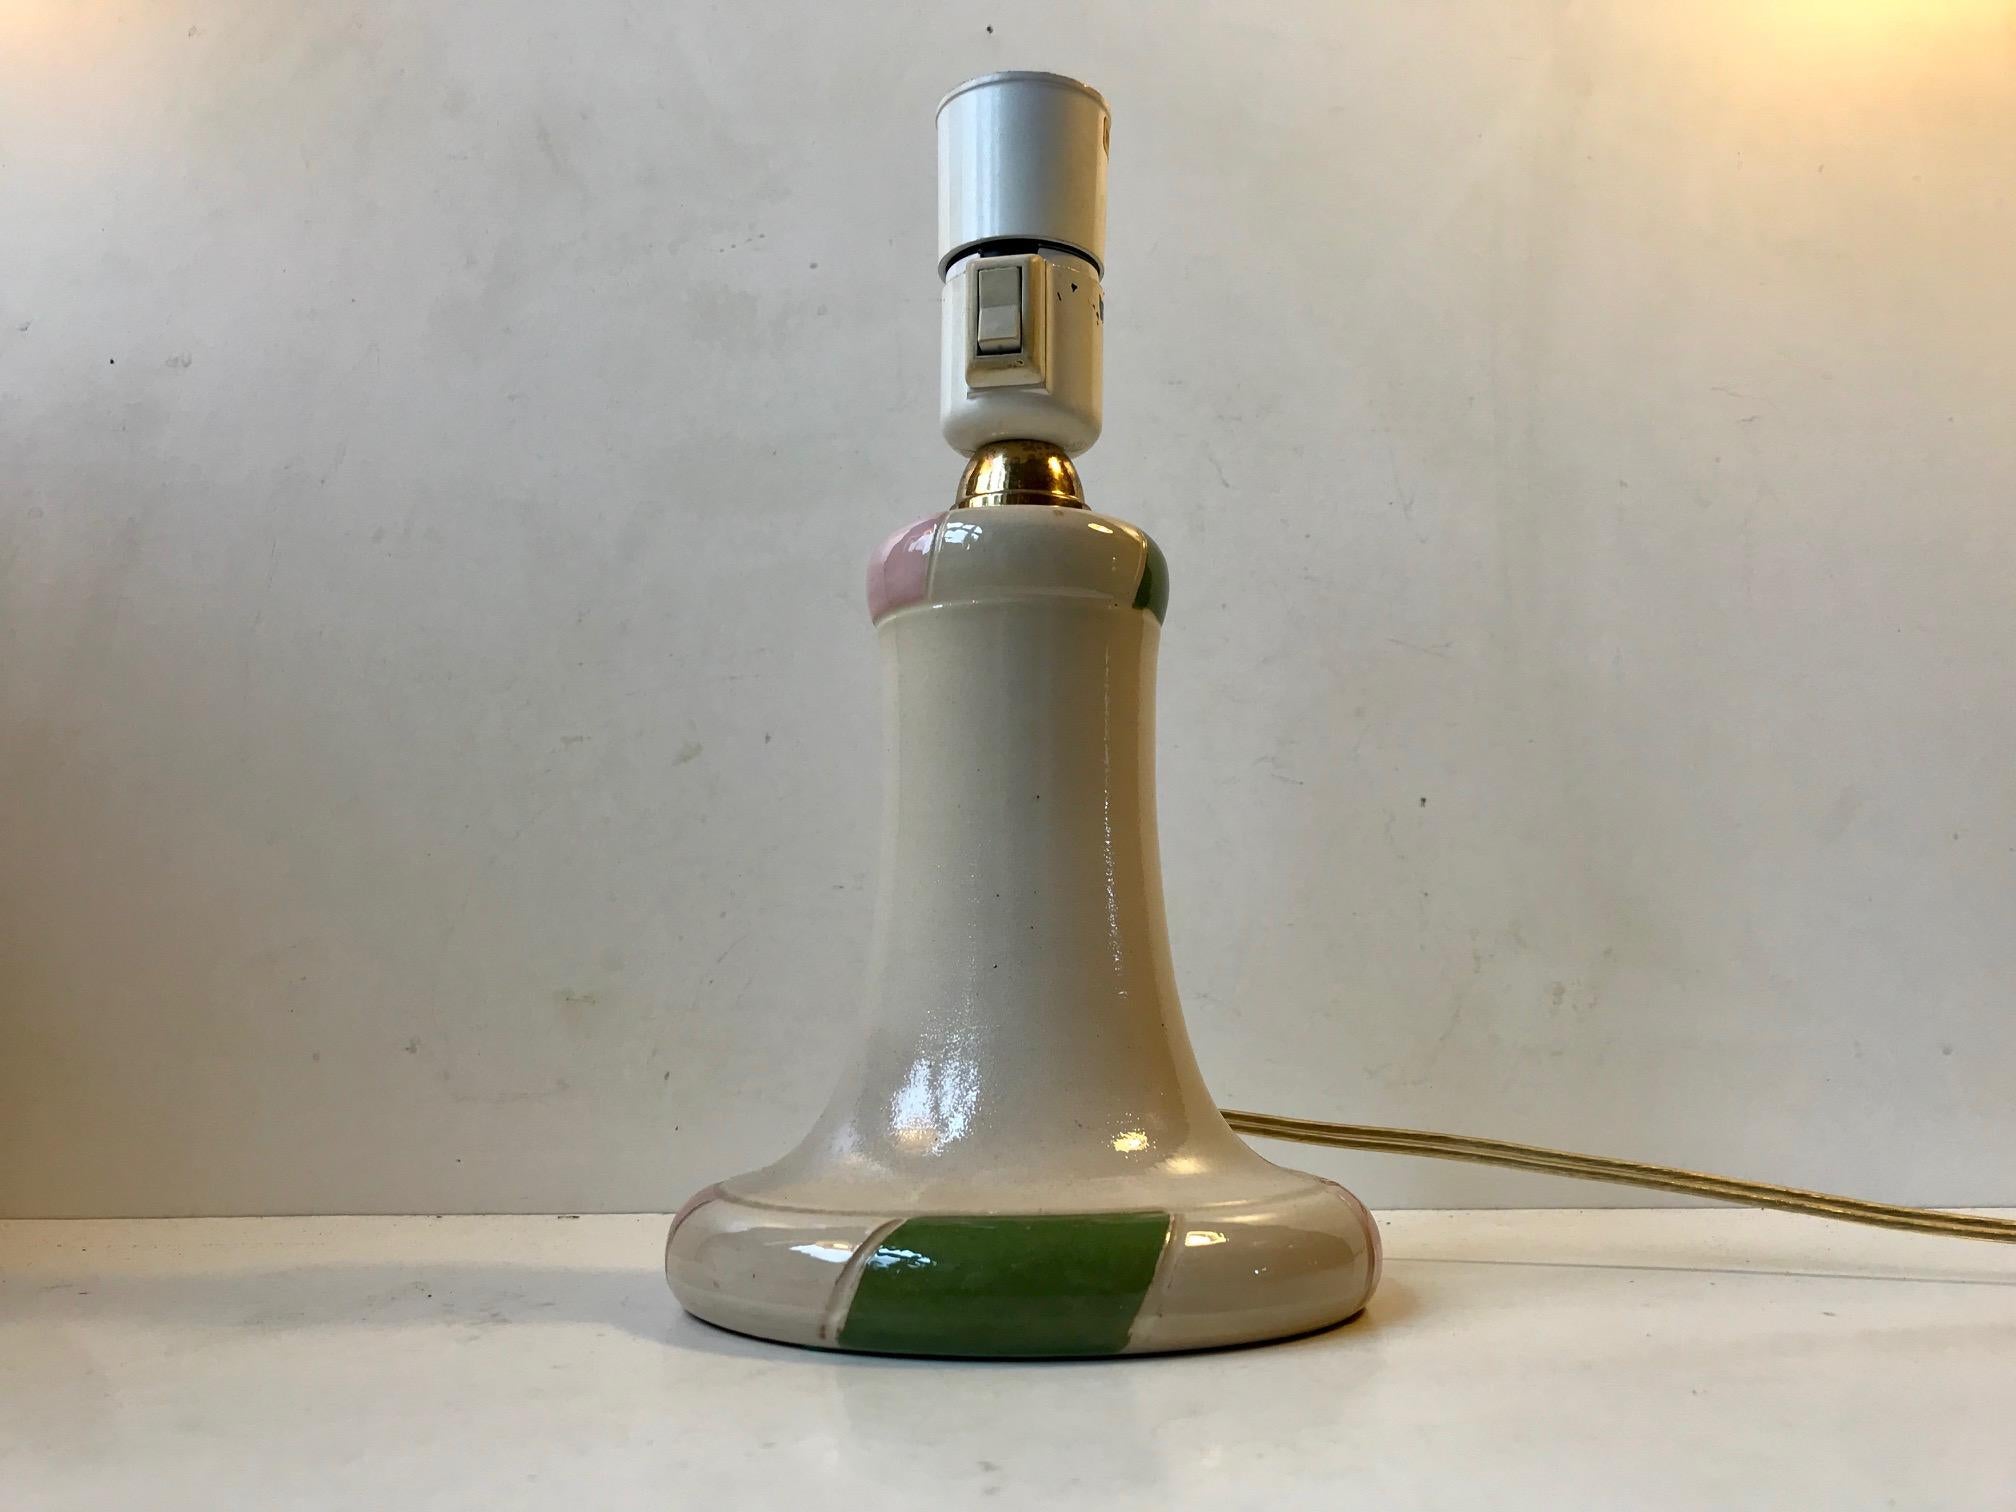 Pottery Danish Art Deco Revival Table Lamp with Pink and Green Glaze by Dågård, 1970s